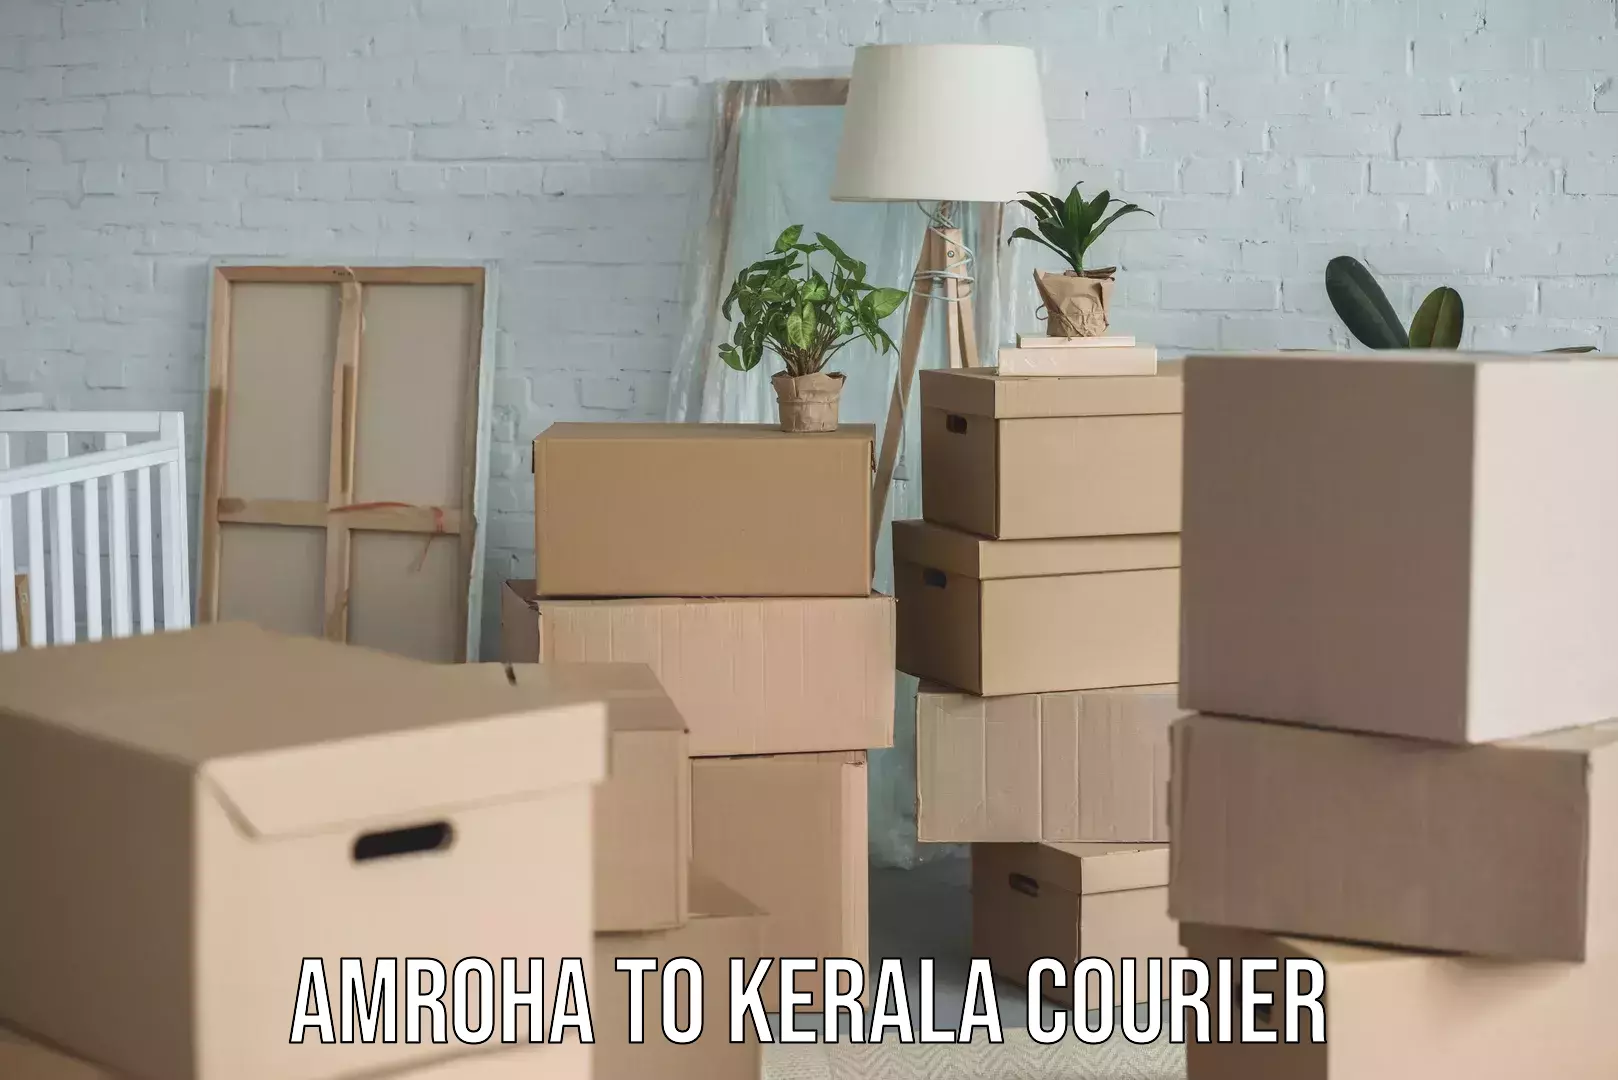 Automated parcel services Amroha to Kerala